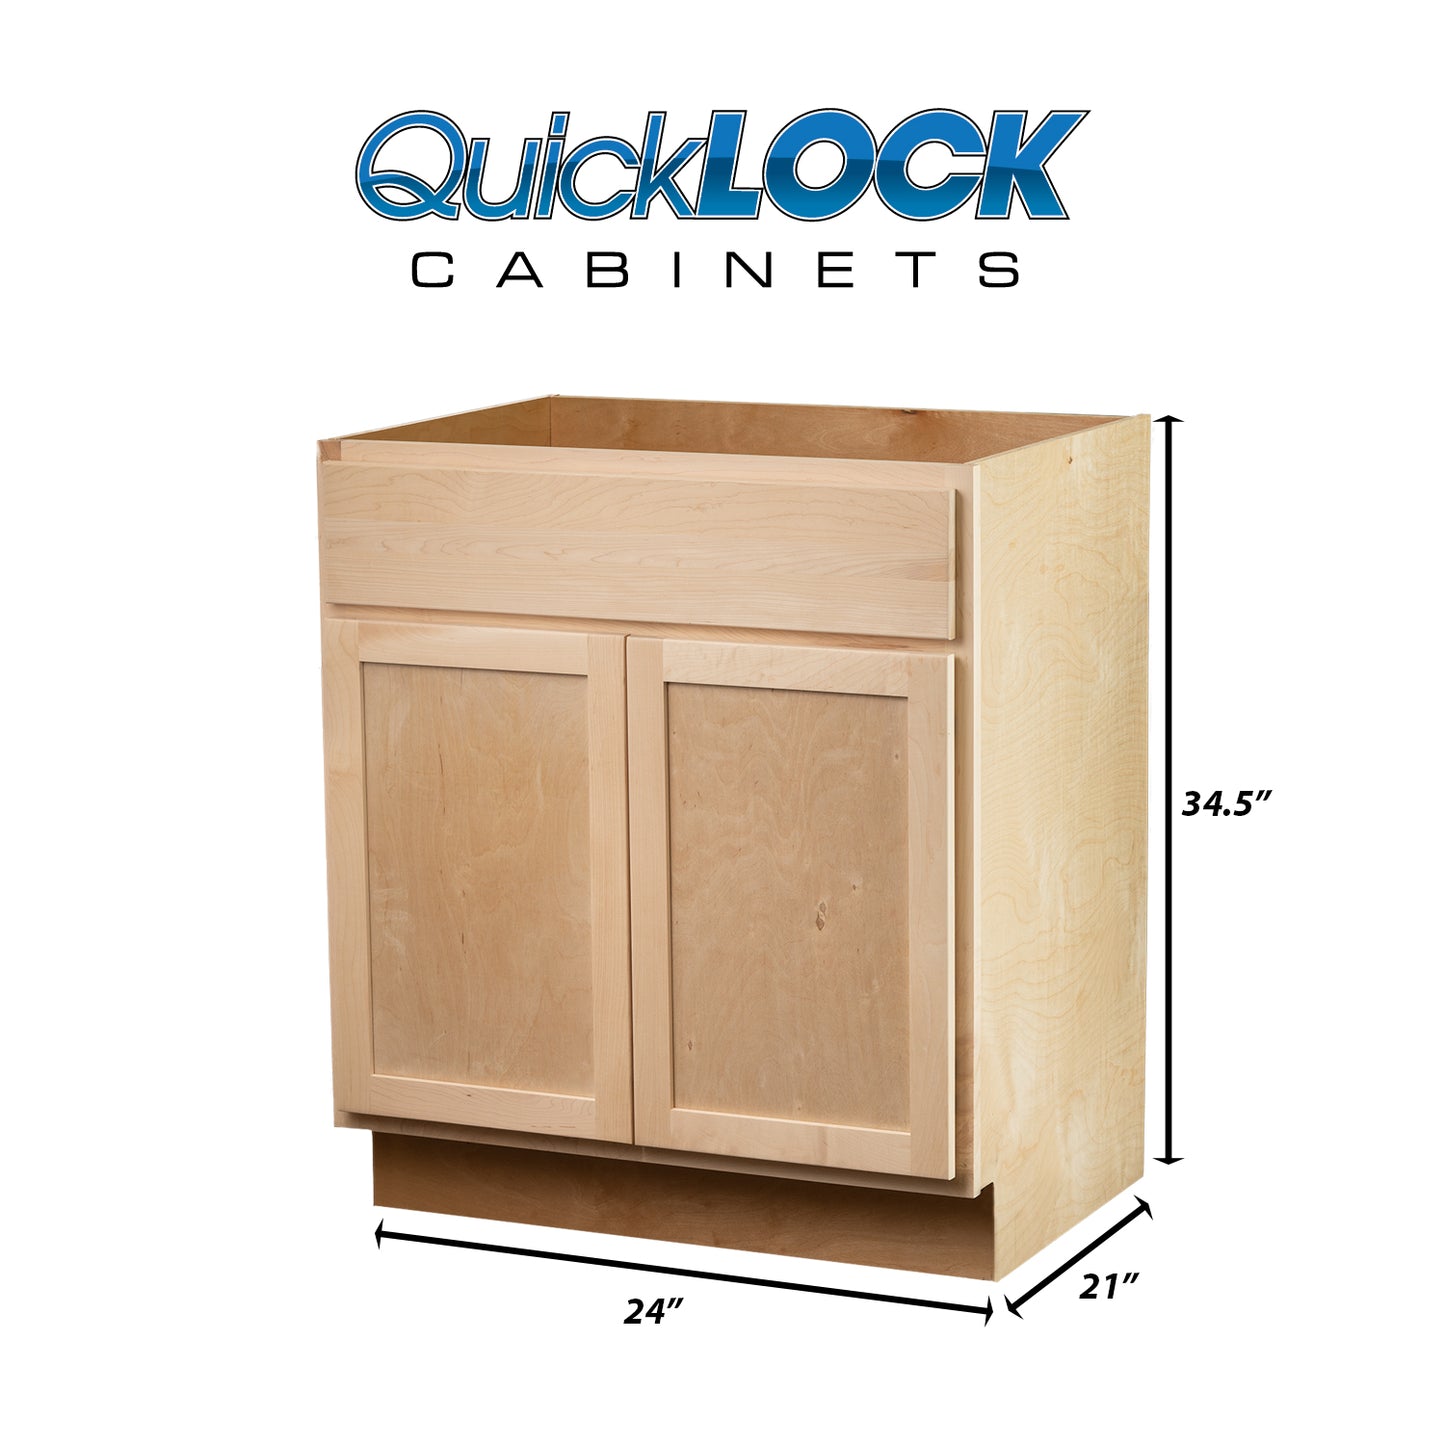 Quicklock RTA (Ready-to-Assemble) Raw Maple Vanity Base Cabinet | 24"Wx34.5"Hx21"D